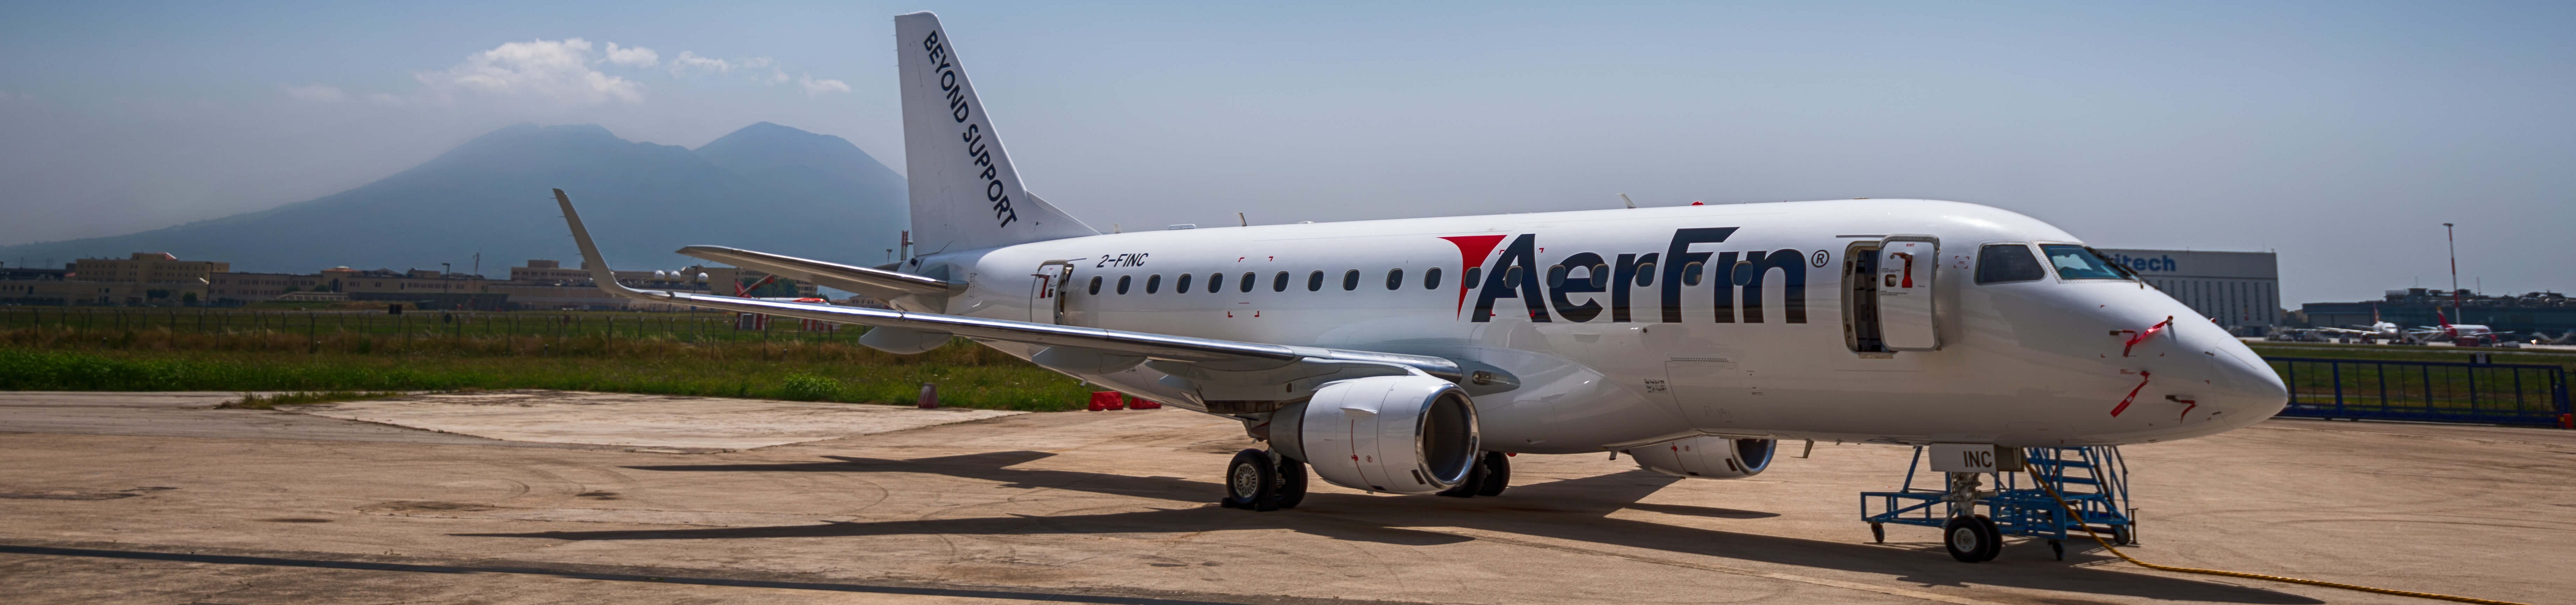 AerFin brings new E170 EJets and pool programs to the market